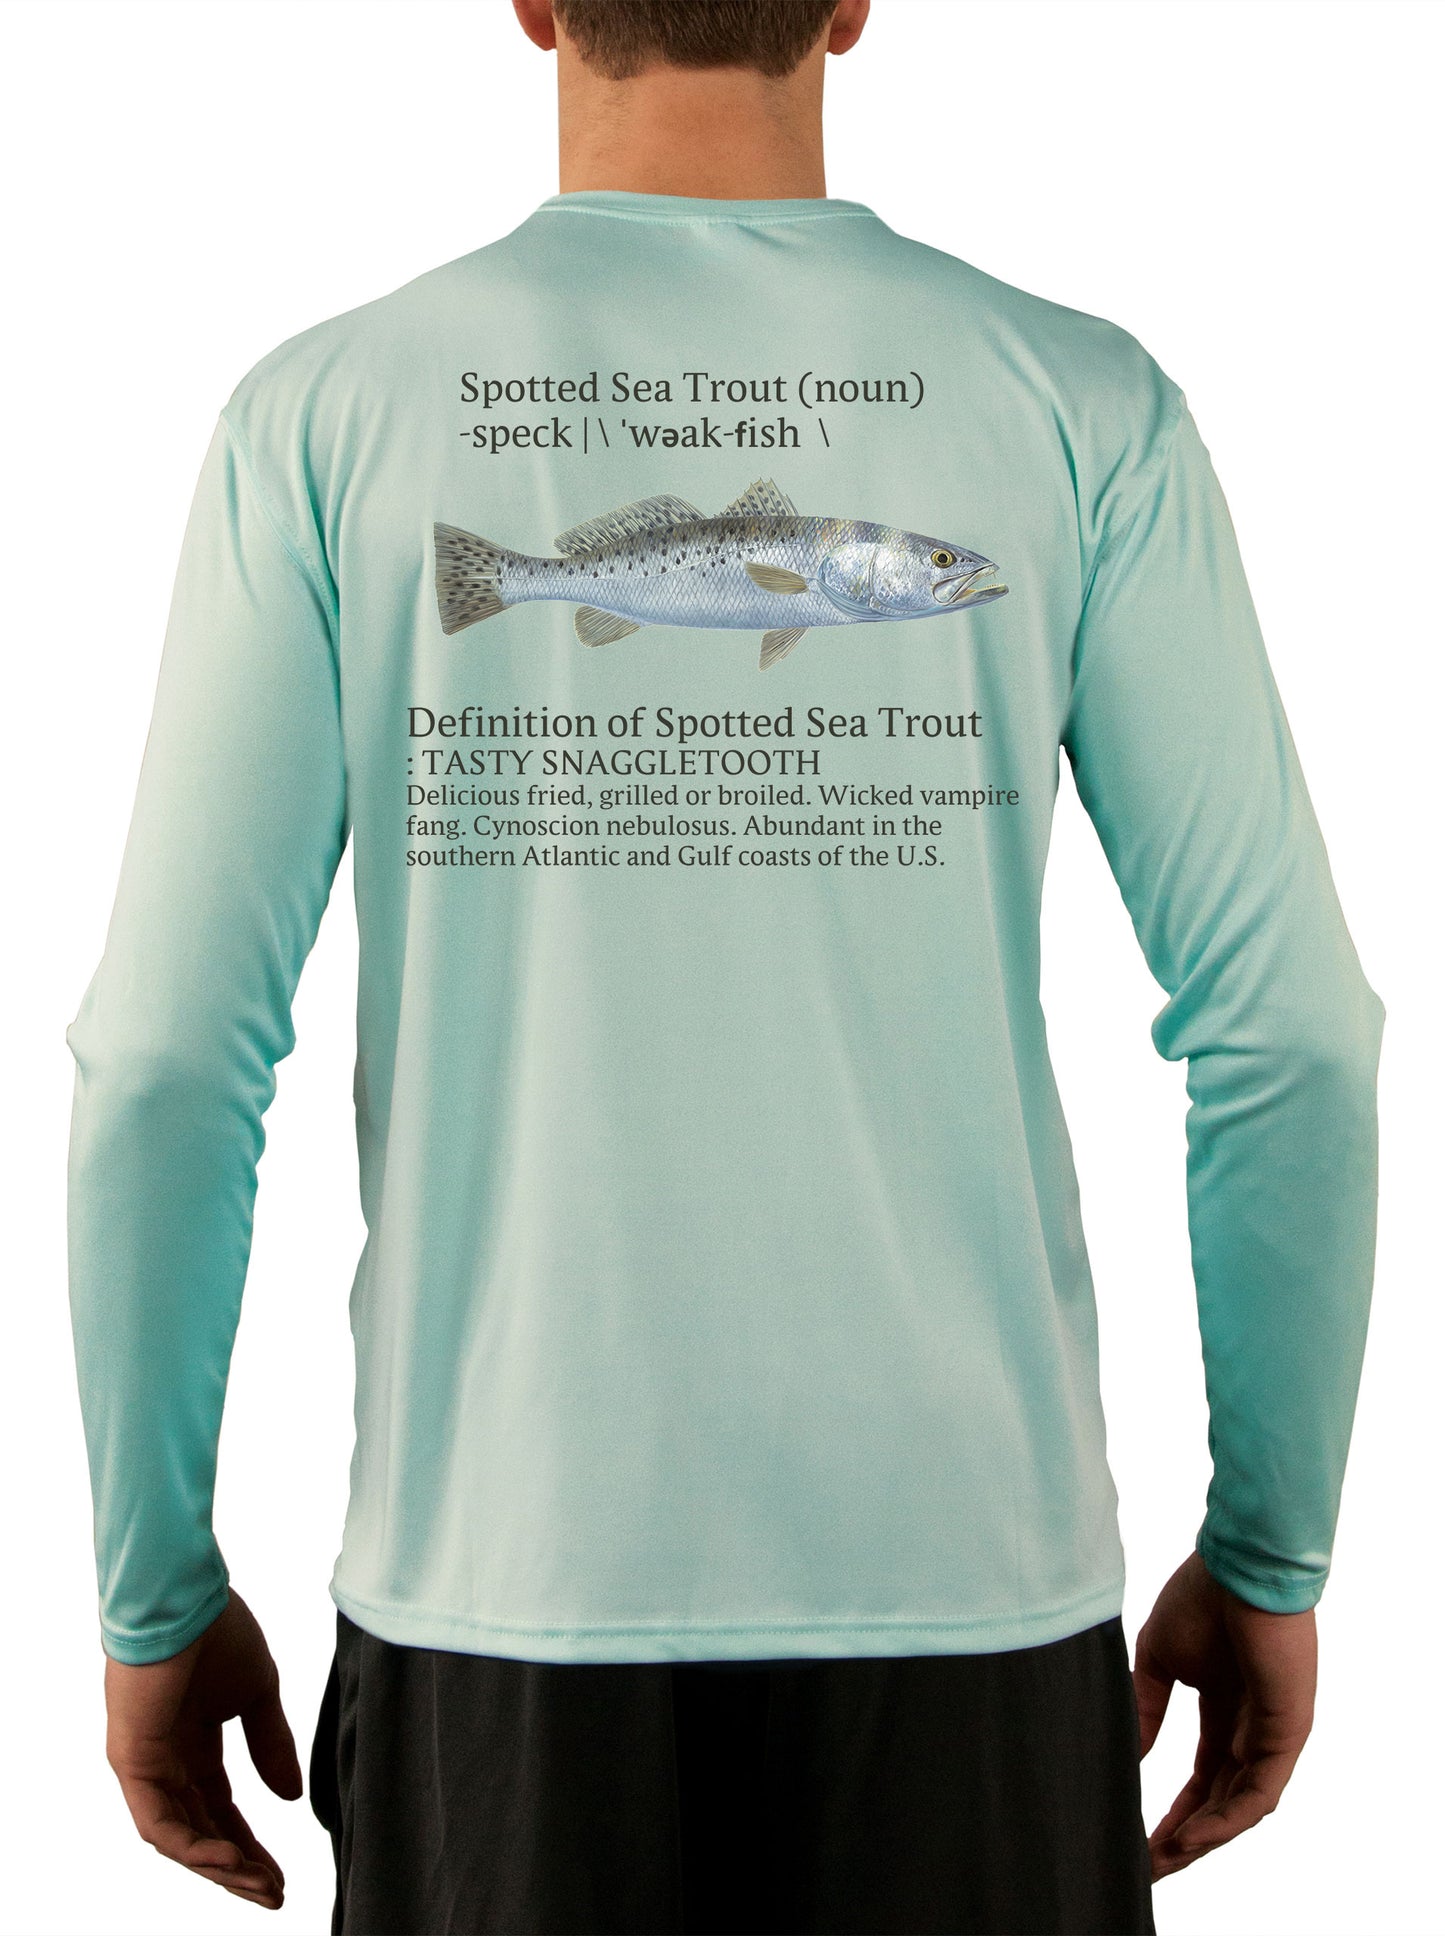 Speckled Trout Fishing Shirts for Men Skiff Inshore - UV Protected +50 Sun Protection with Moisture Wicking Technology Large / Seagrass